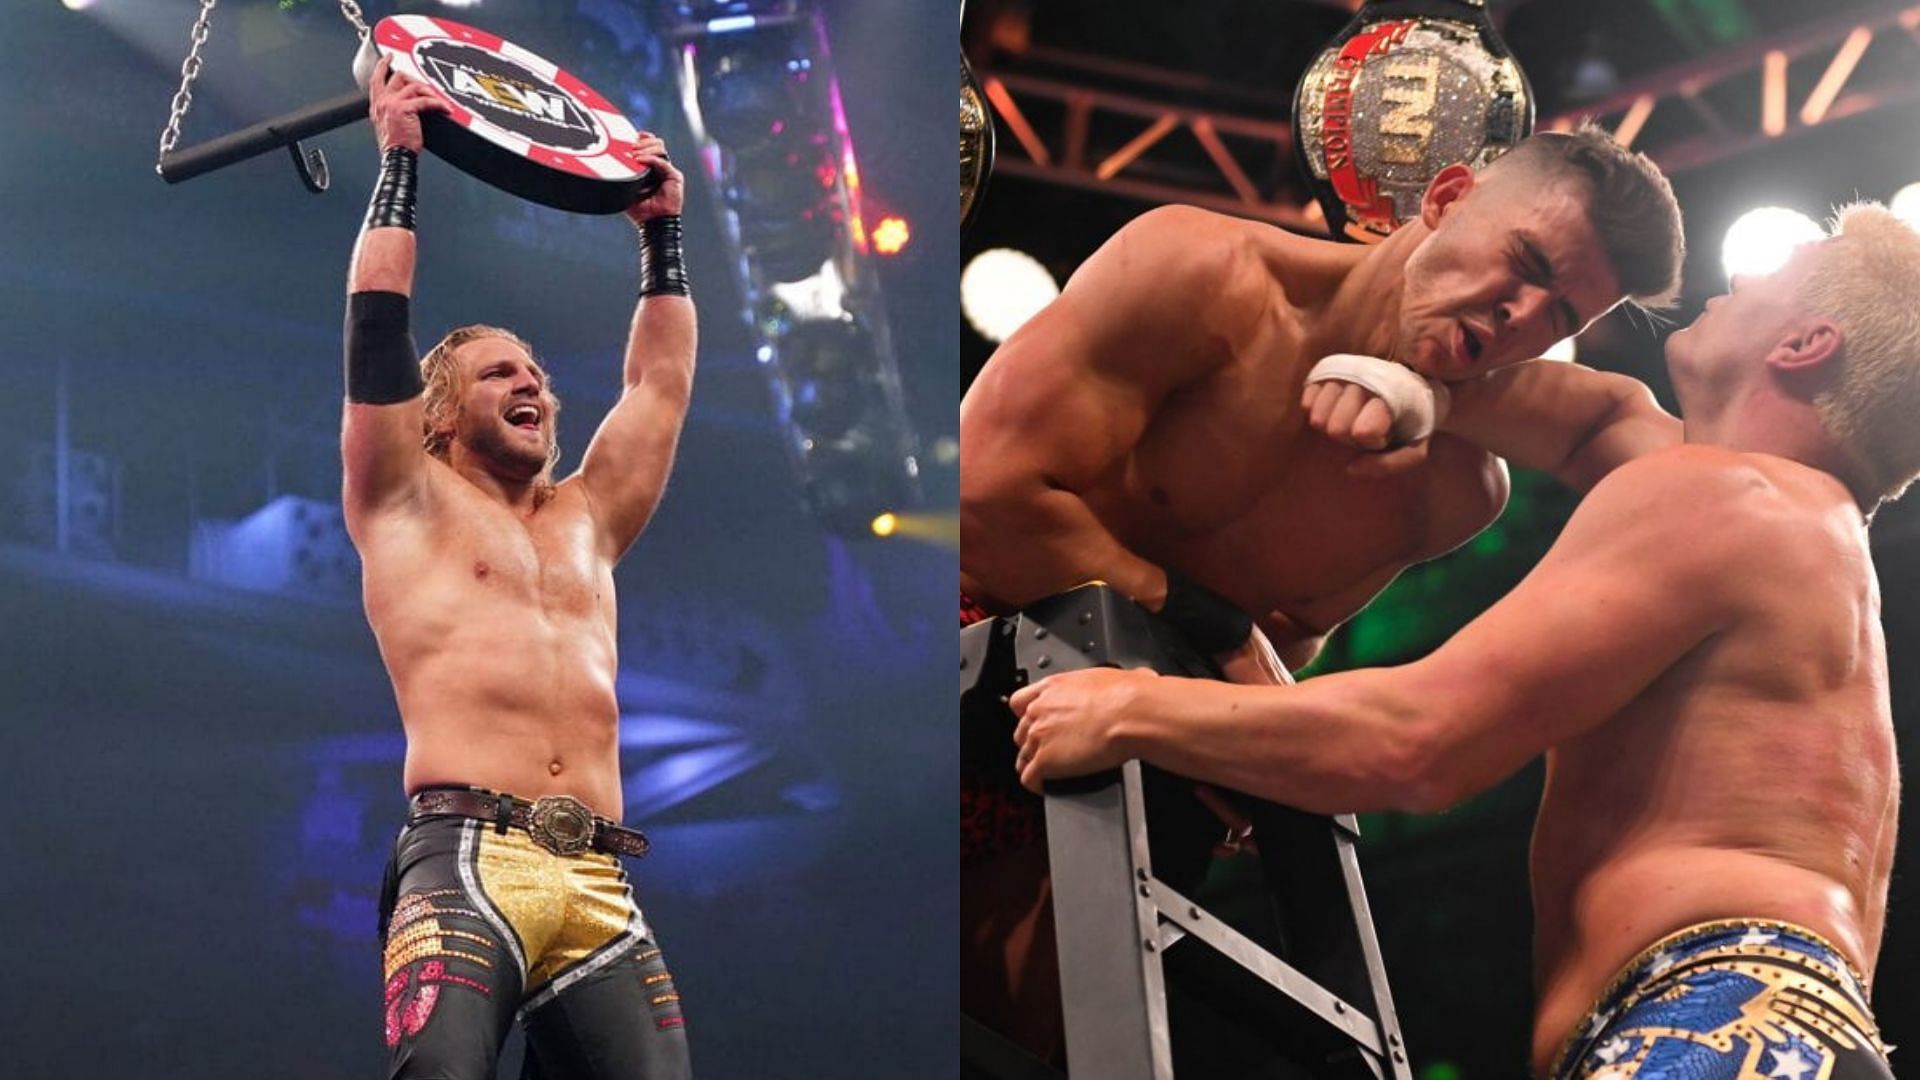 AEW has presented several outstanding ladder matches